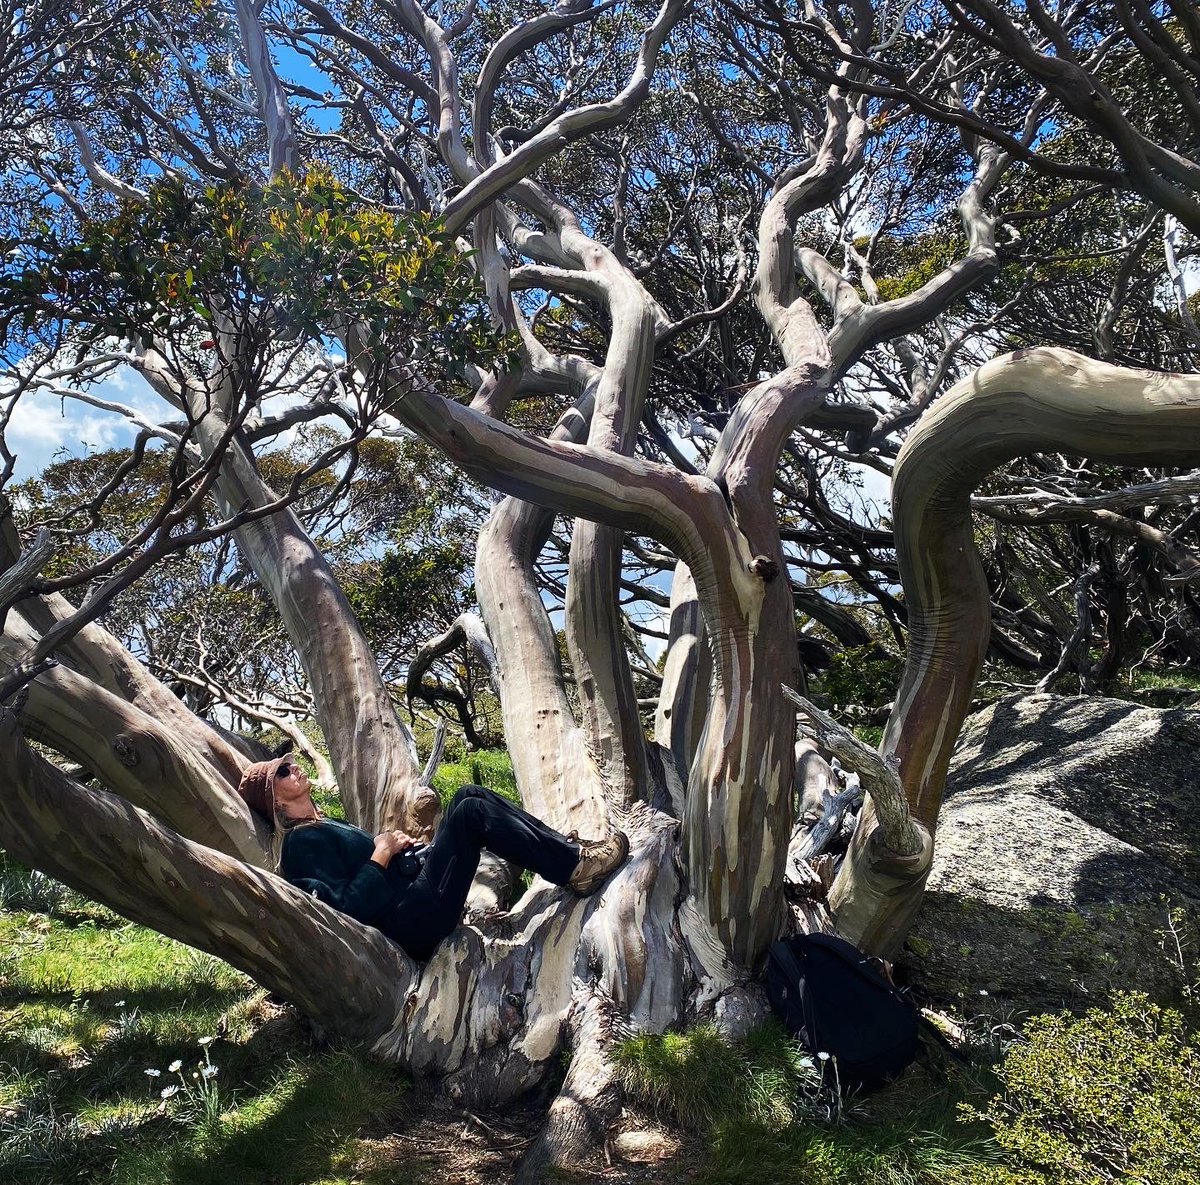 Celebrating this glorious snowgum on #NationalEucalyptDay. Ancient tree, cradling me & many creatures. Spectacular Eucalyptus pauciflora, with a misleading name (saw many flowers on this day, but that’s the legacy of a Namer seeing a snapshot) Ngarigo name?#kosciuszko #LoveAGum